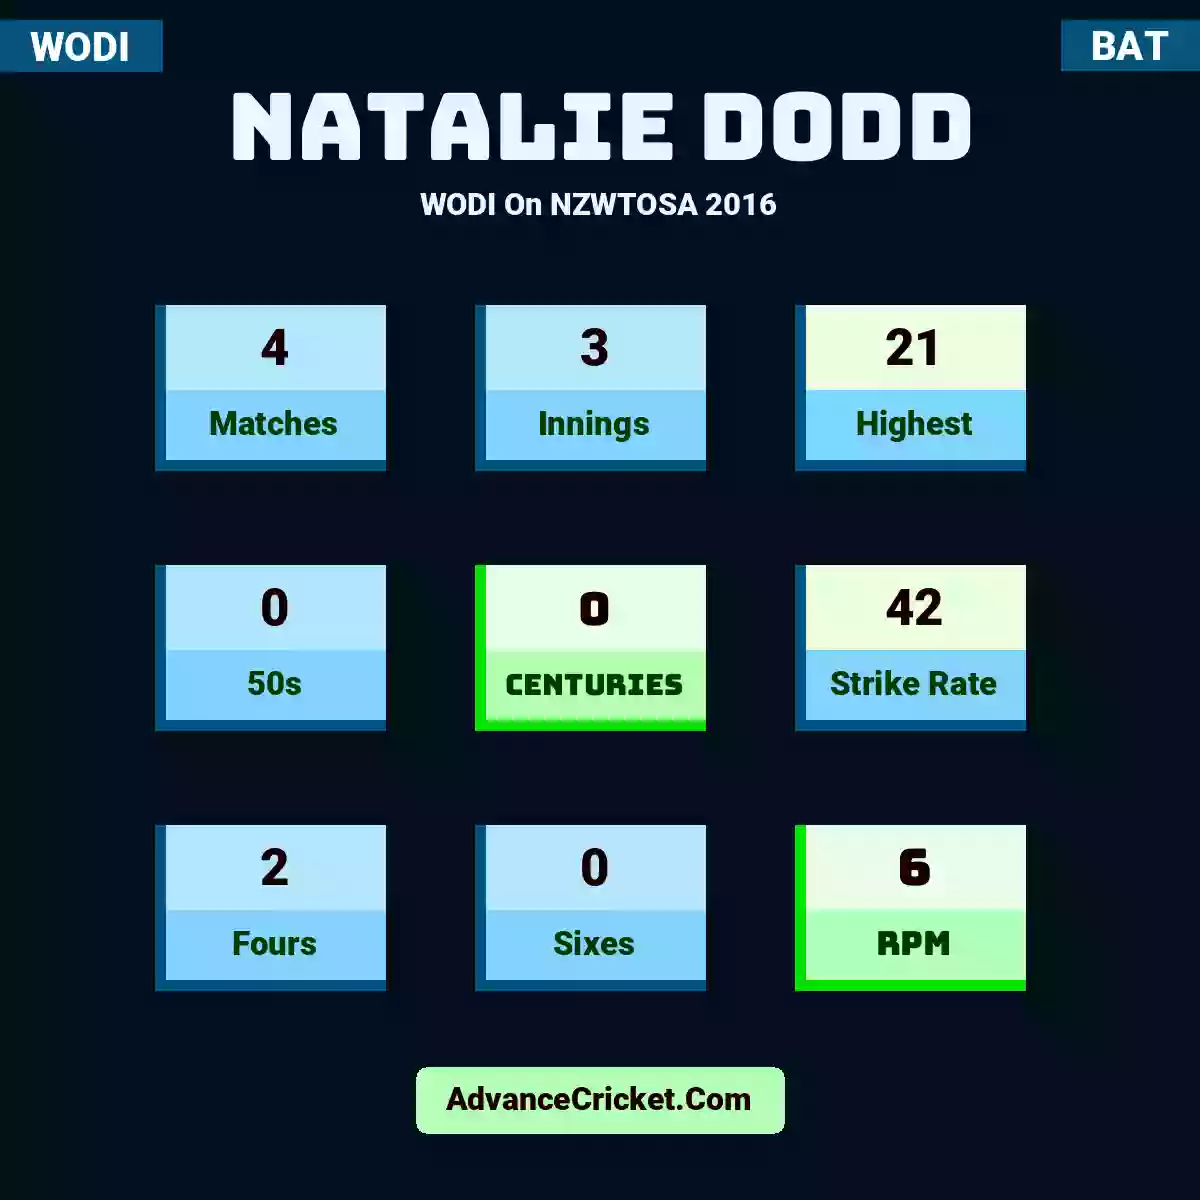 Natalie Dodd WODI  On NZWTOSA 2016, Natalie Dodd played 4 matches, scored 21 runs as highest, 0 half-centuries, and 0 centuries, with a strike rate of 42. N.Dodd hit 2 fours and 0 sixes, with an RPM of 6.